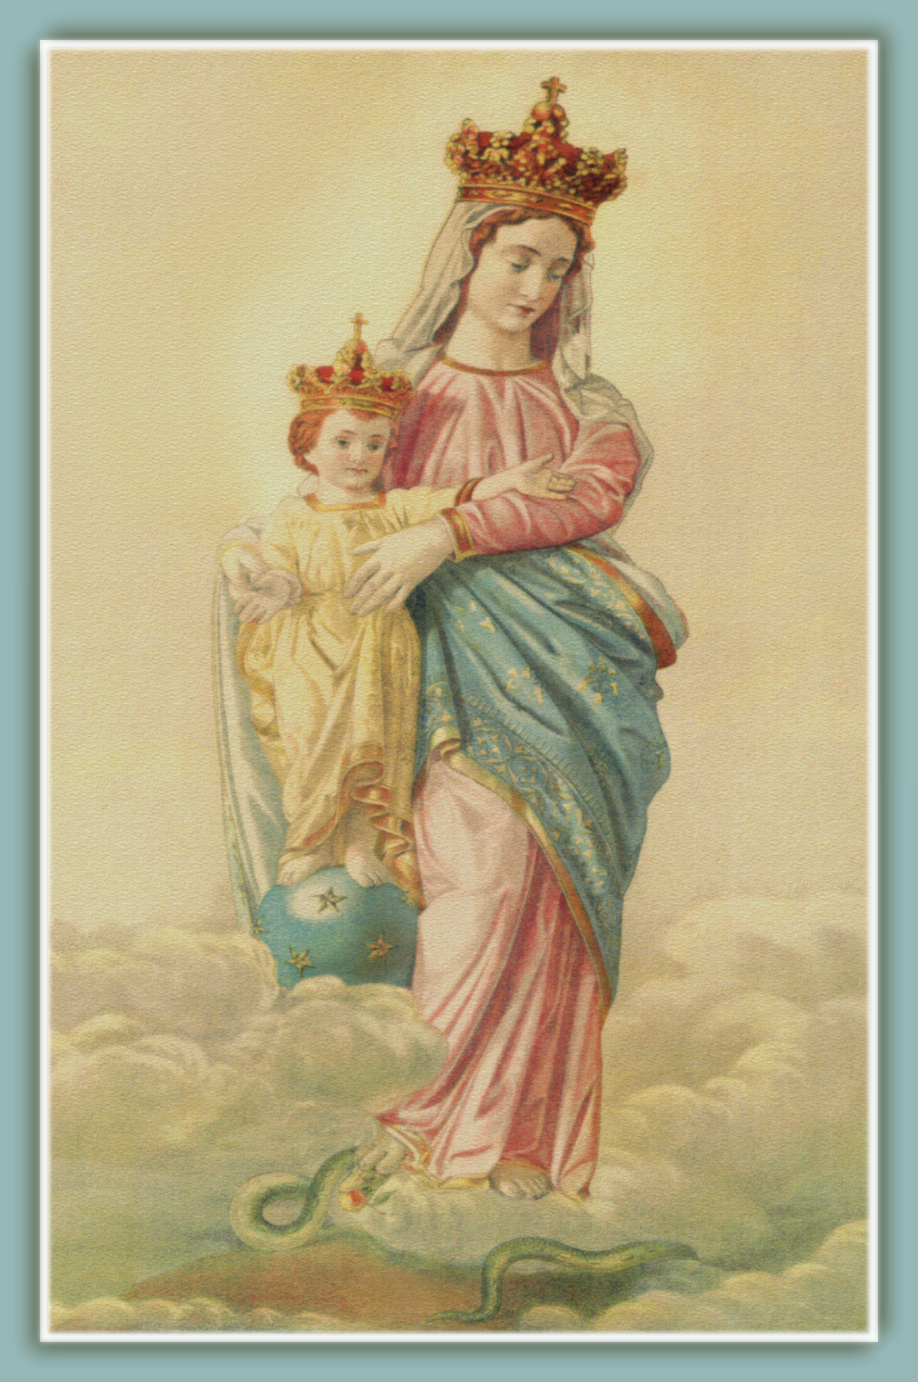 OUR LADY OF VICTORY TEXTURIZED